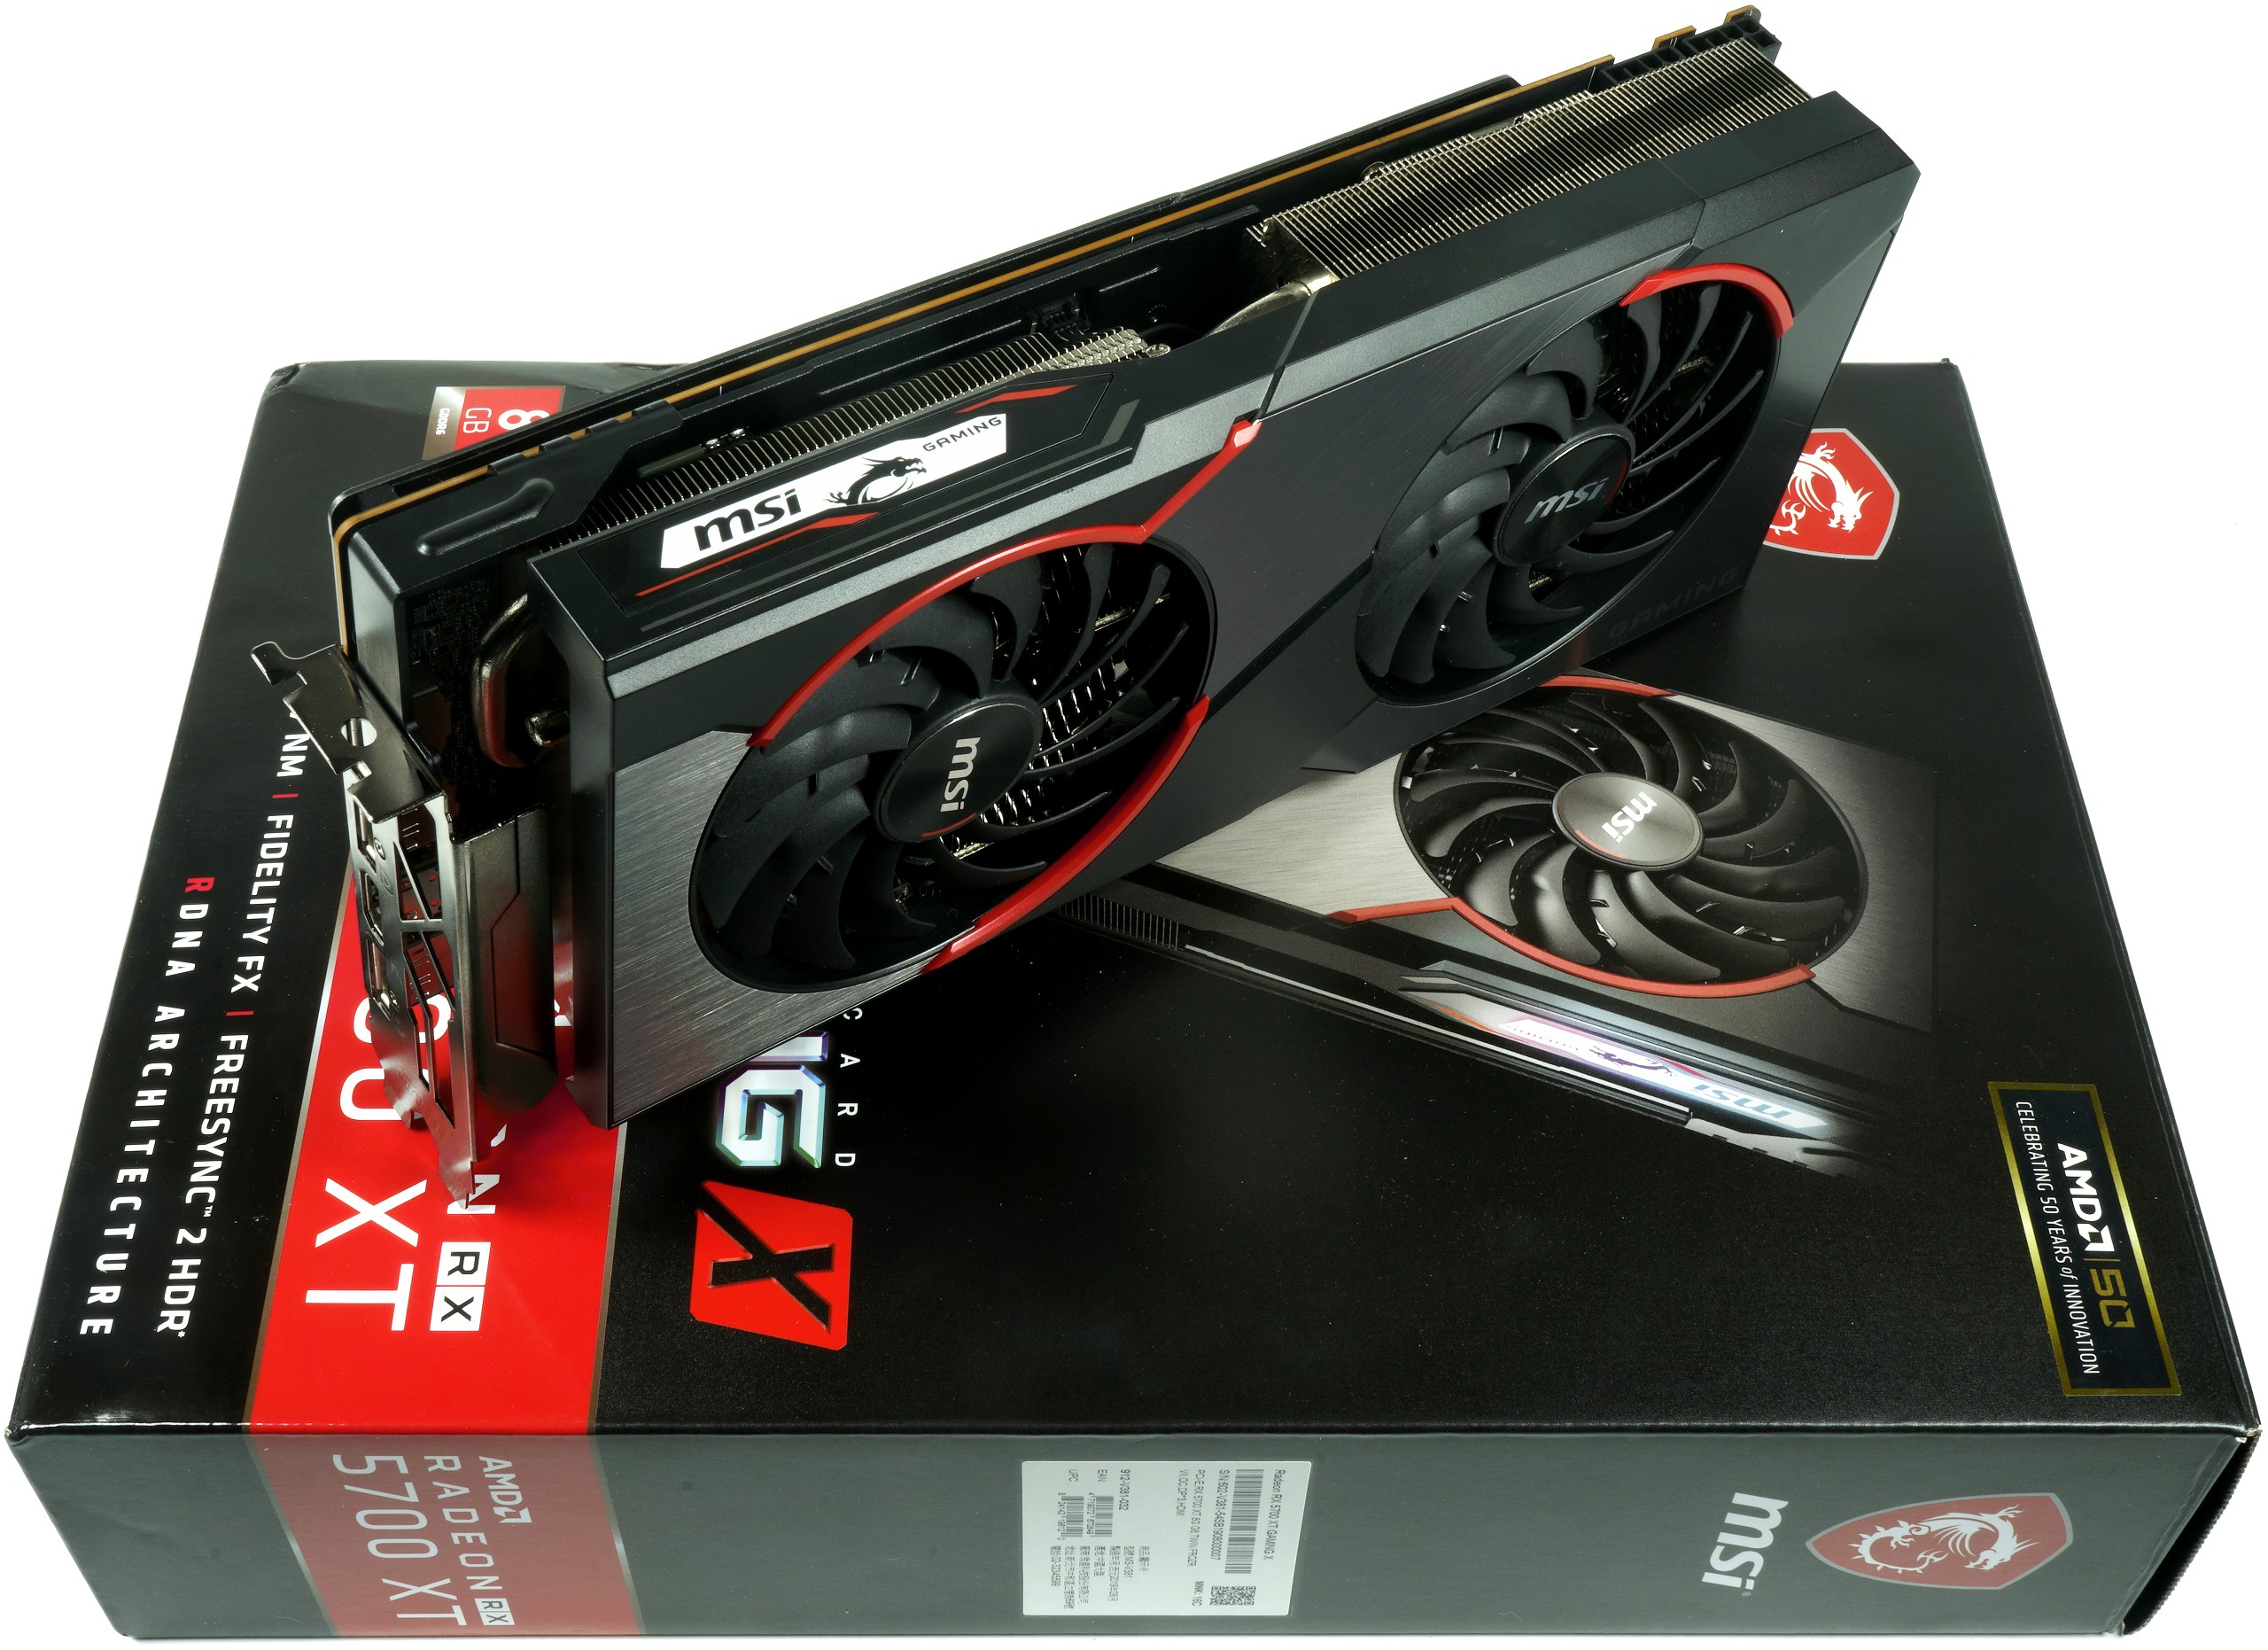 MSI RX 5700 XT Gaming X review - Radeon power pack with good genes